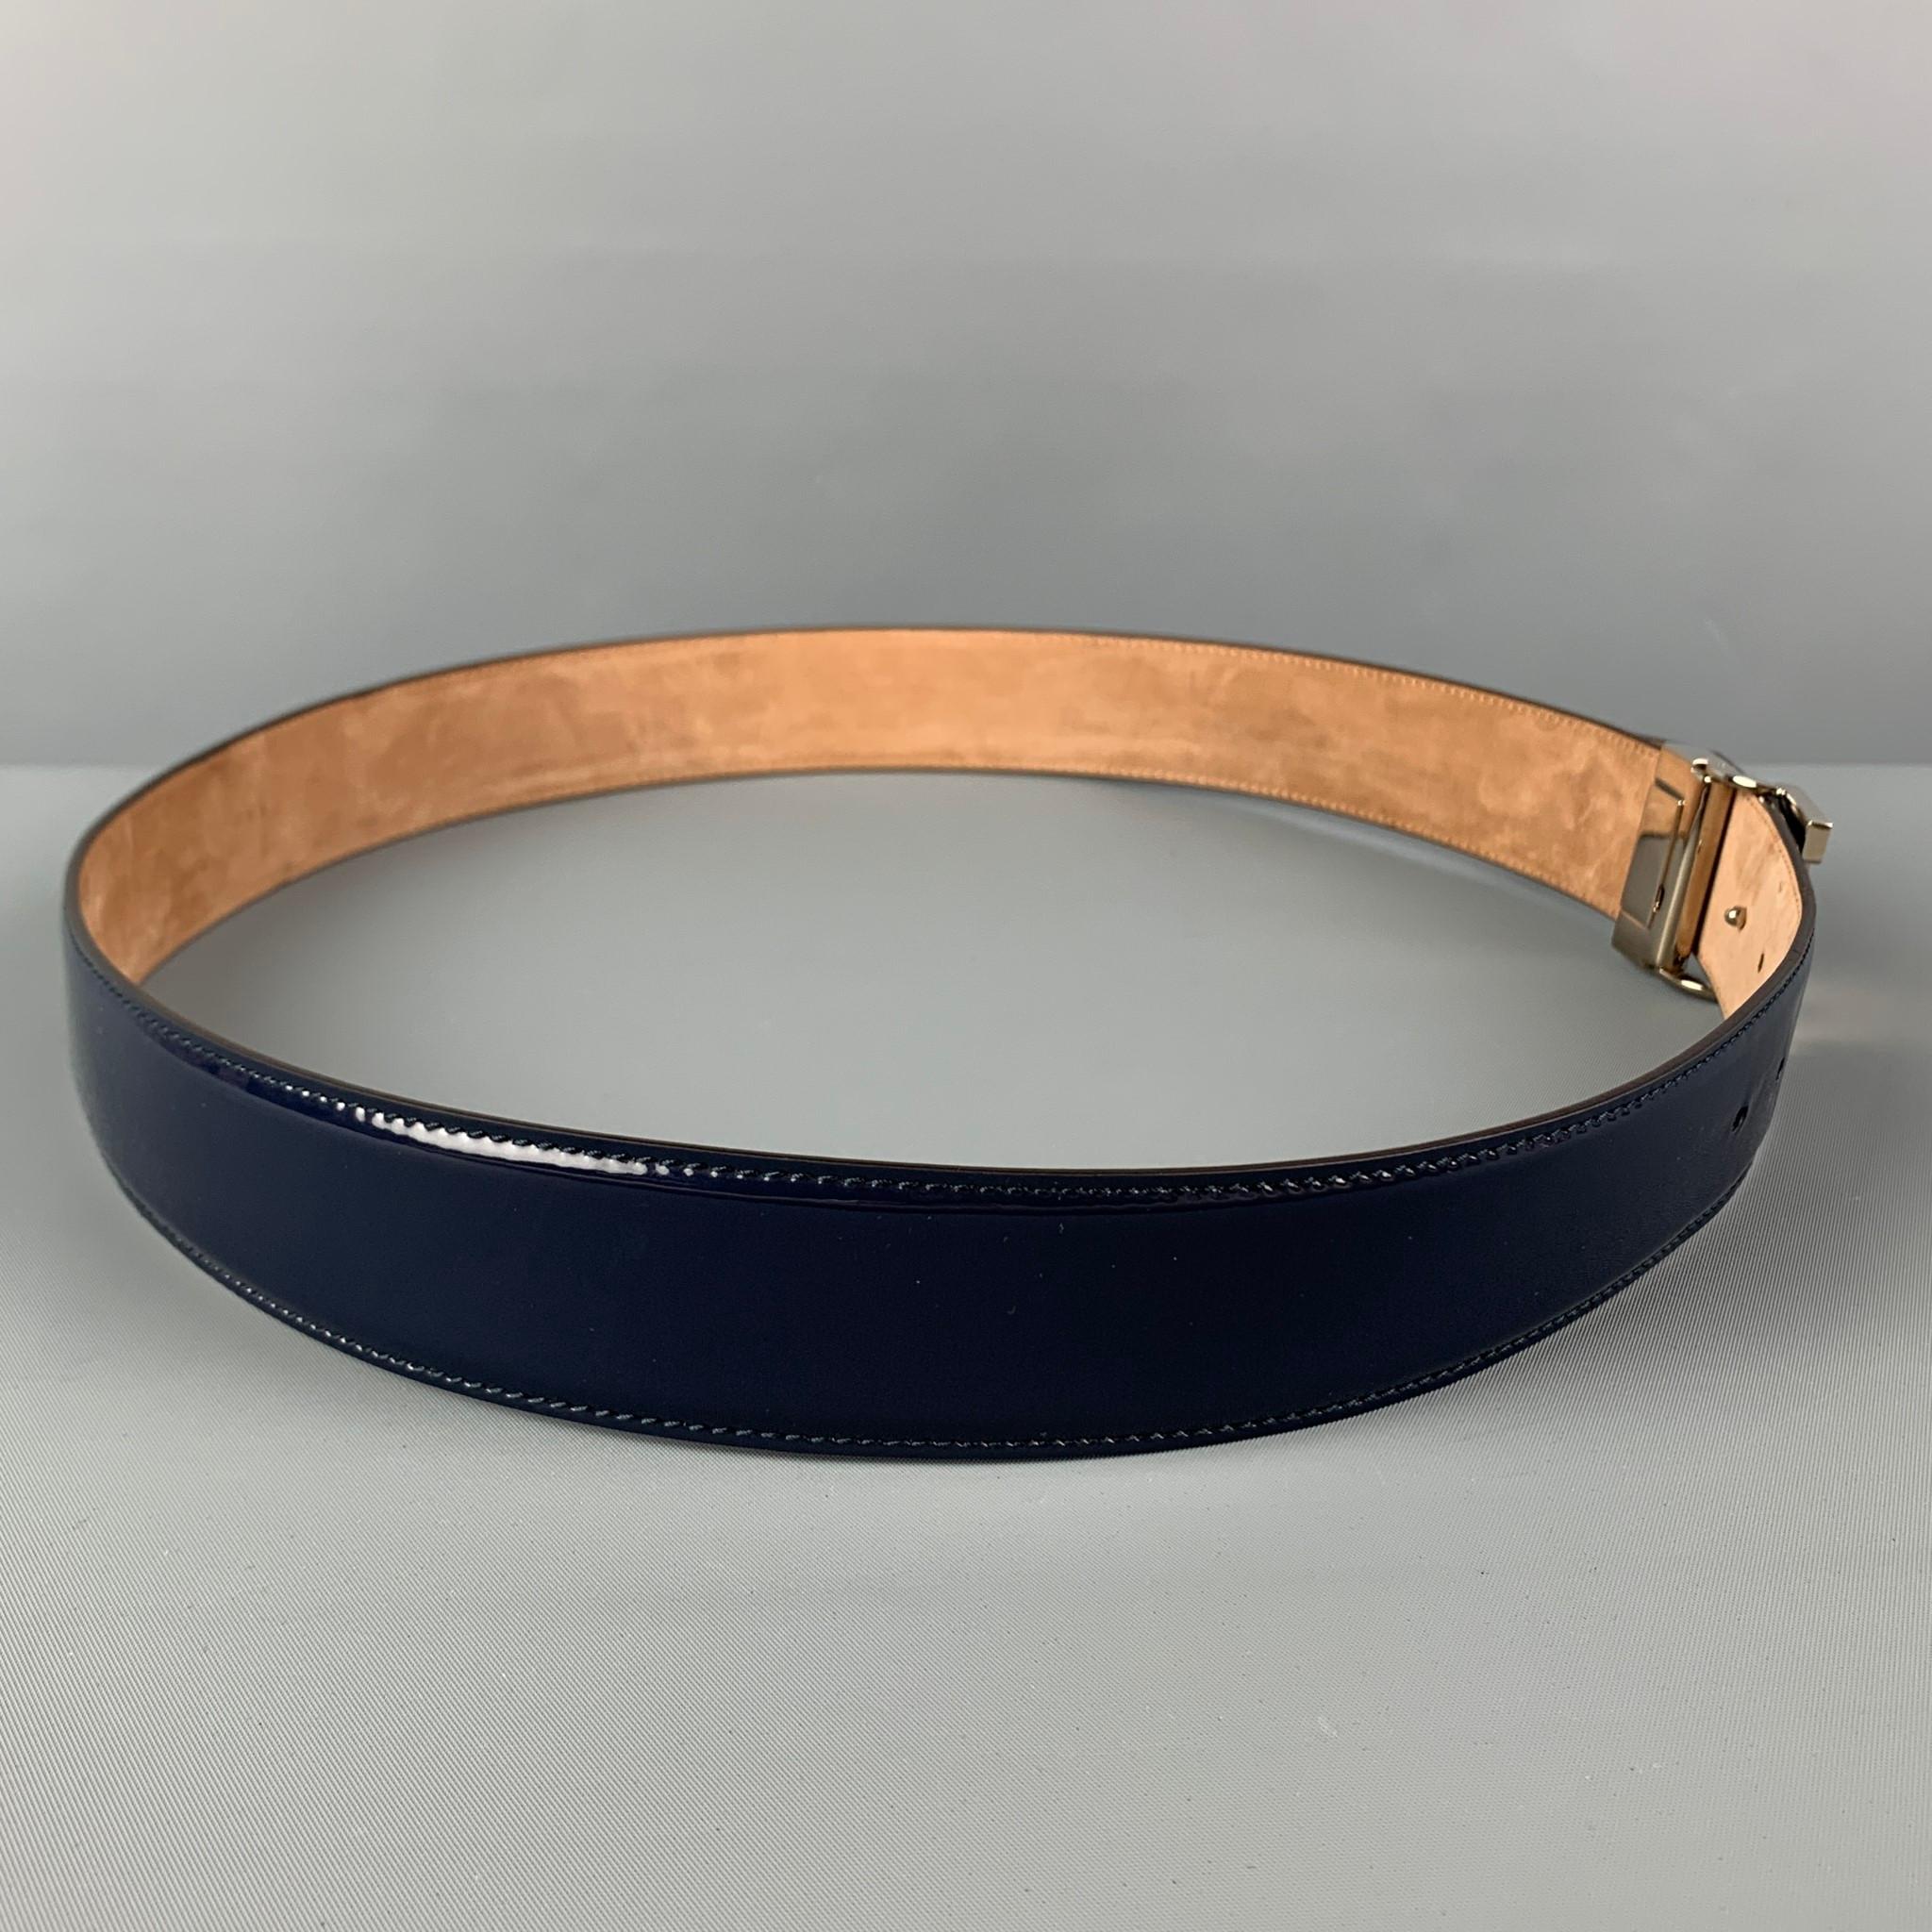 BALLY belt comes in a navy patent leather featuring a silver tone logo buckle closure. Made in Italy. 

Very Good Pre-Owned Condition.
Marked: 110/44
Original Retail Price: $380.00

Length: 43.5 in.
Width: 1.5 in.
Fits: 38 in. - 42 in.
Buckle: 1.25